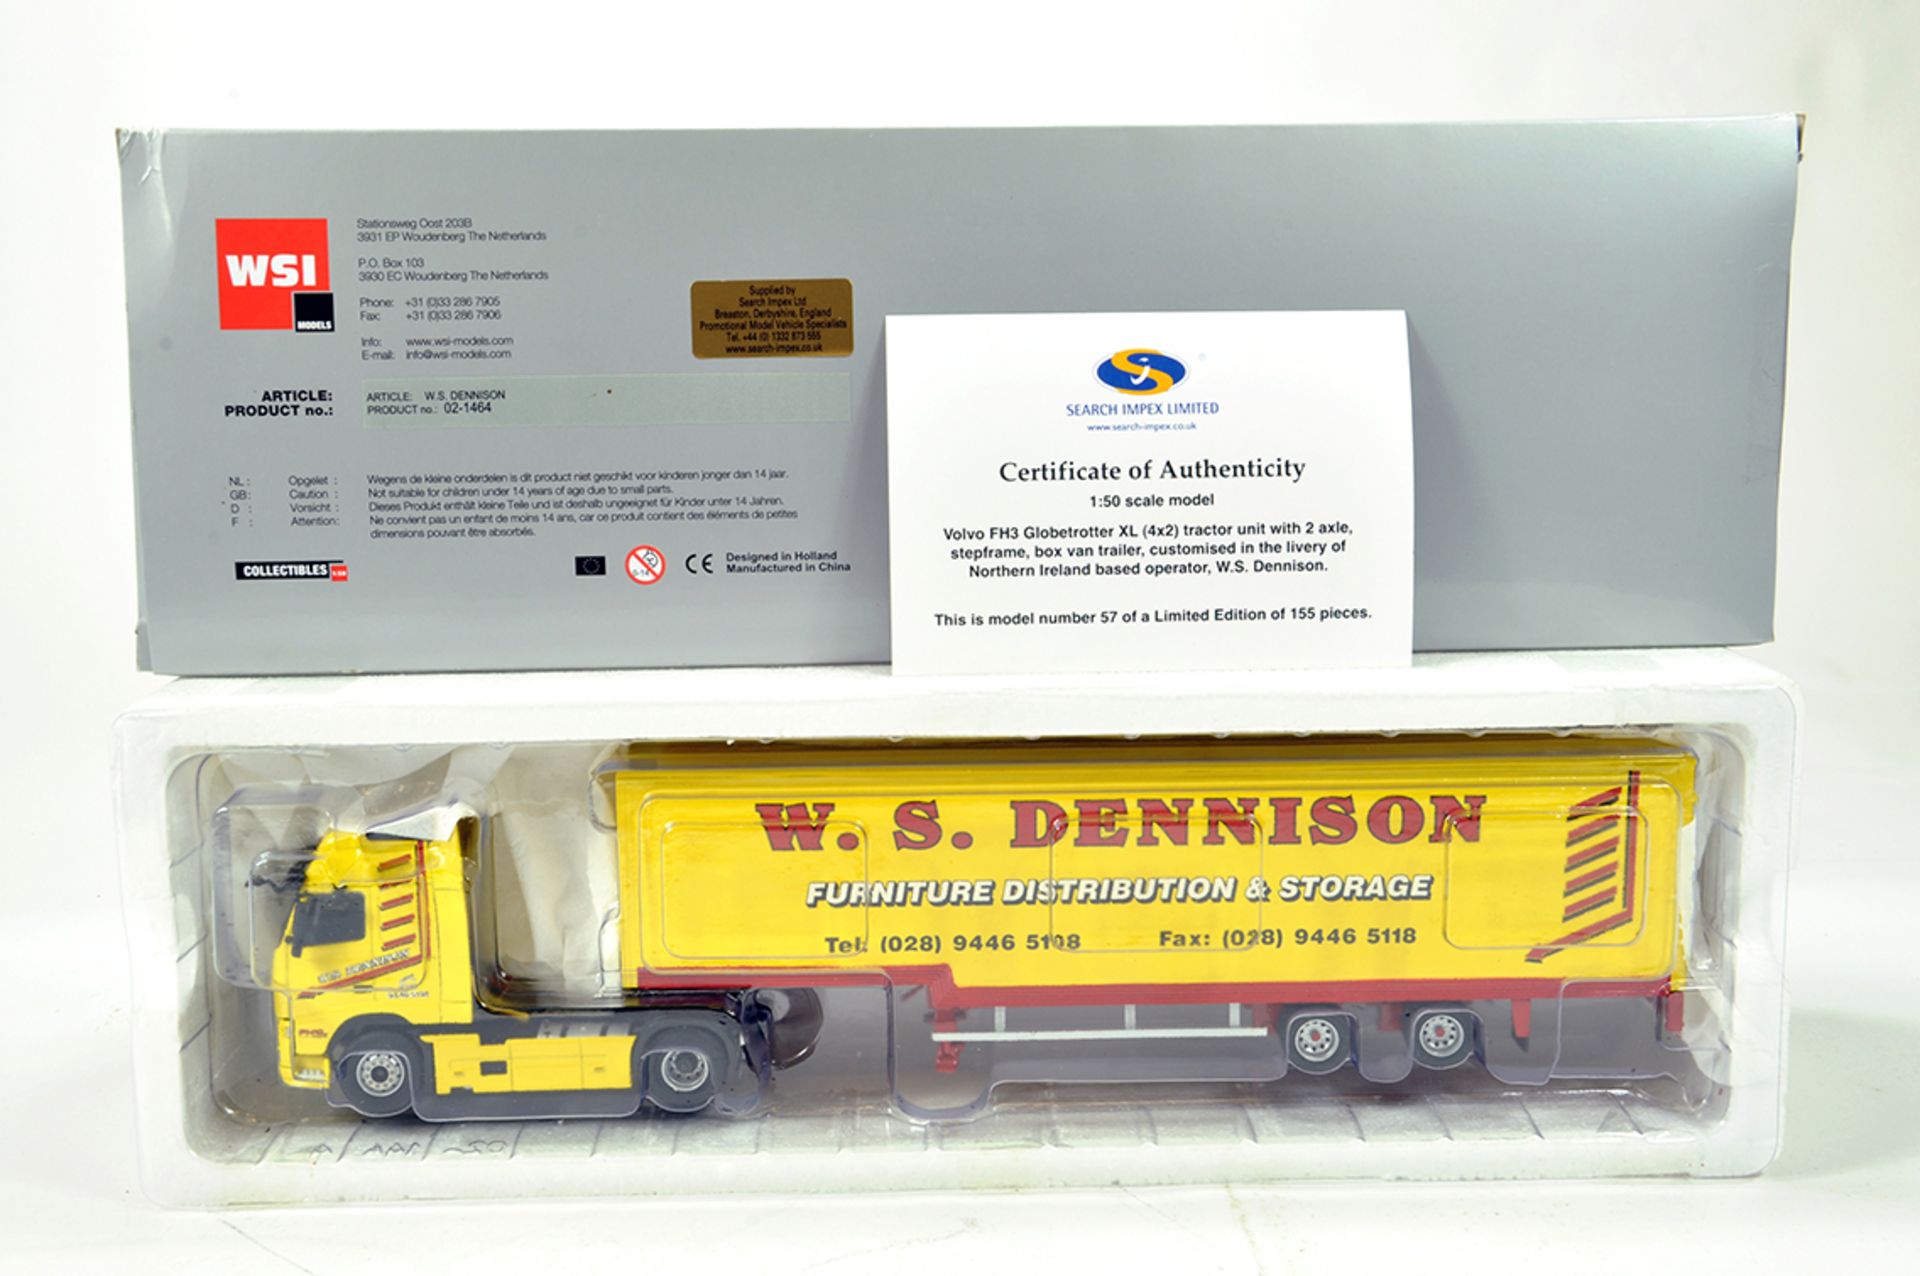 WSI 1/50 High Detail Diecast Truck Issue comprising Search Impex Volvo FH3 with 2 Axle Box Van